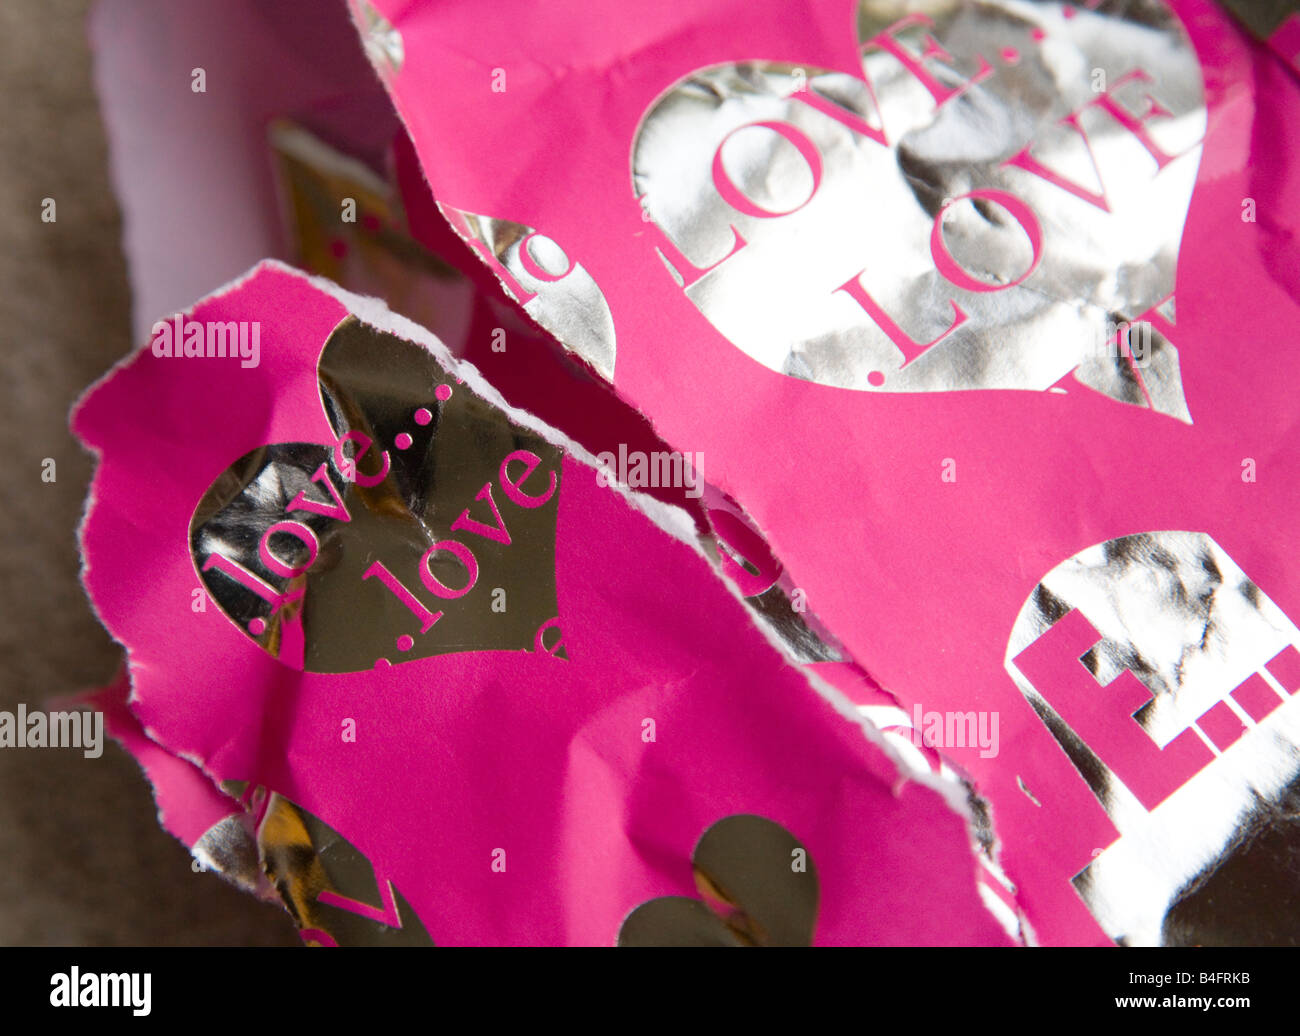 A present. Torn pink wrapping paper with silver hearts. Stock Photo